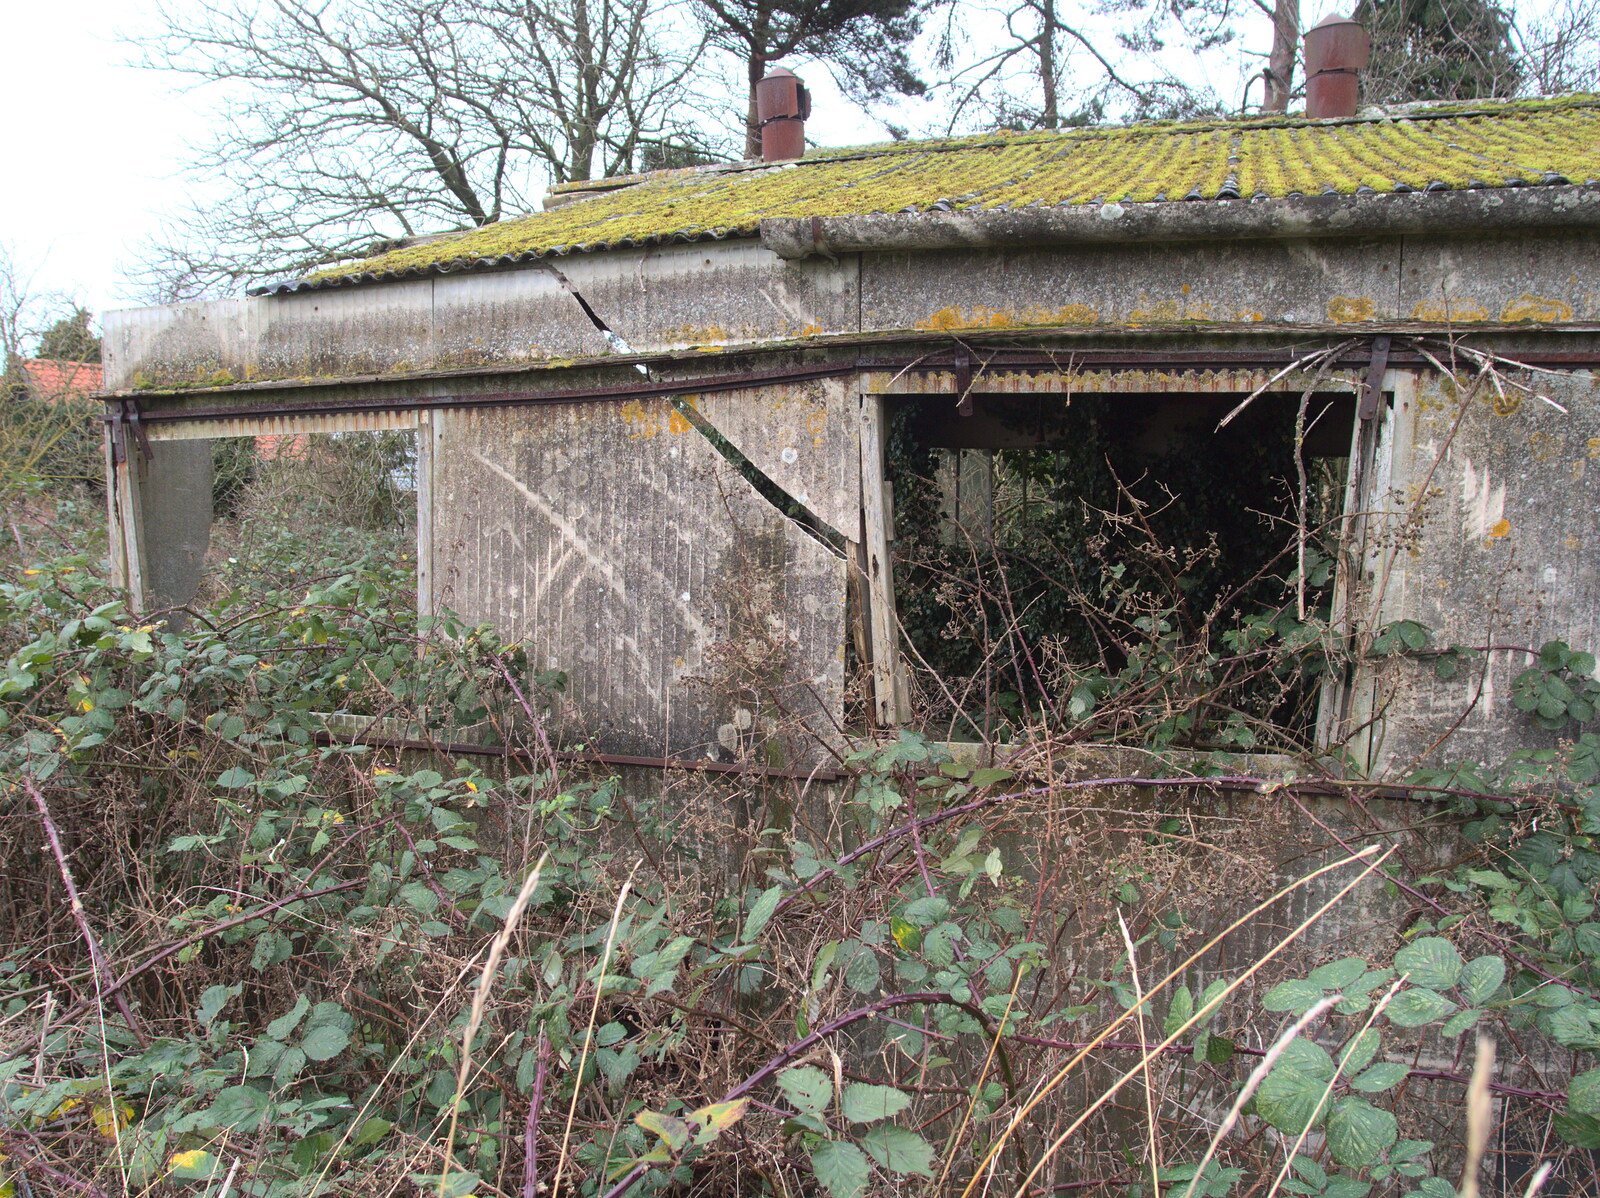 The derelict chicken shed from New Year's Eve With The BBs, The Barrel, Banham, Norfolk - 31st December 2015